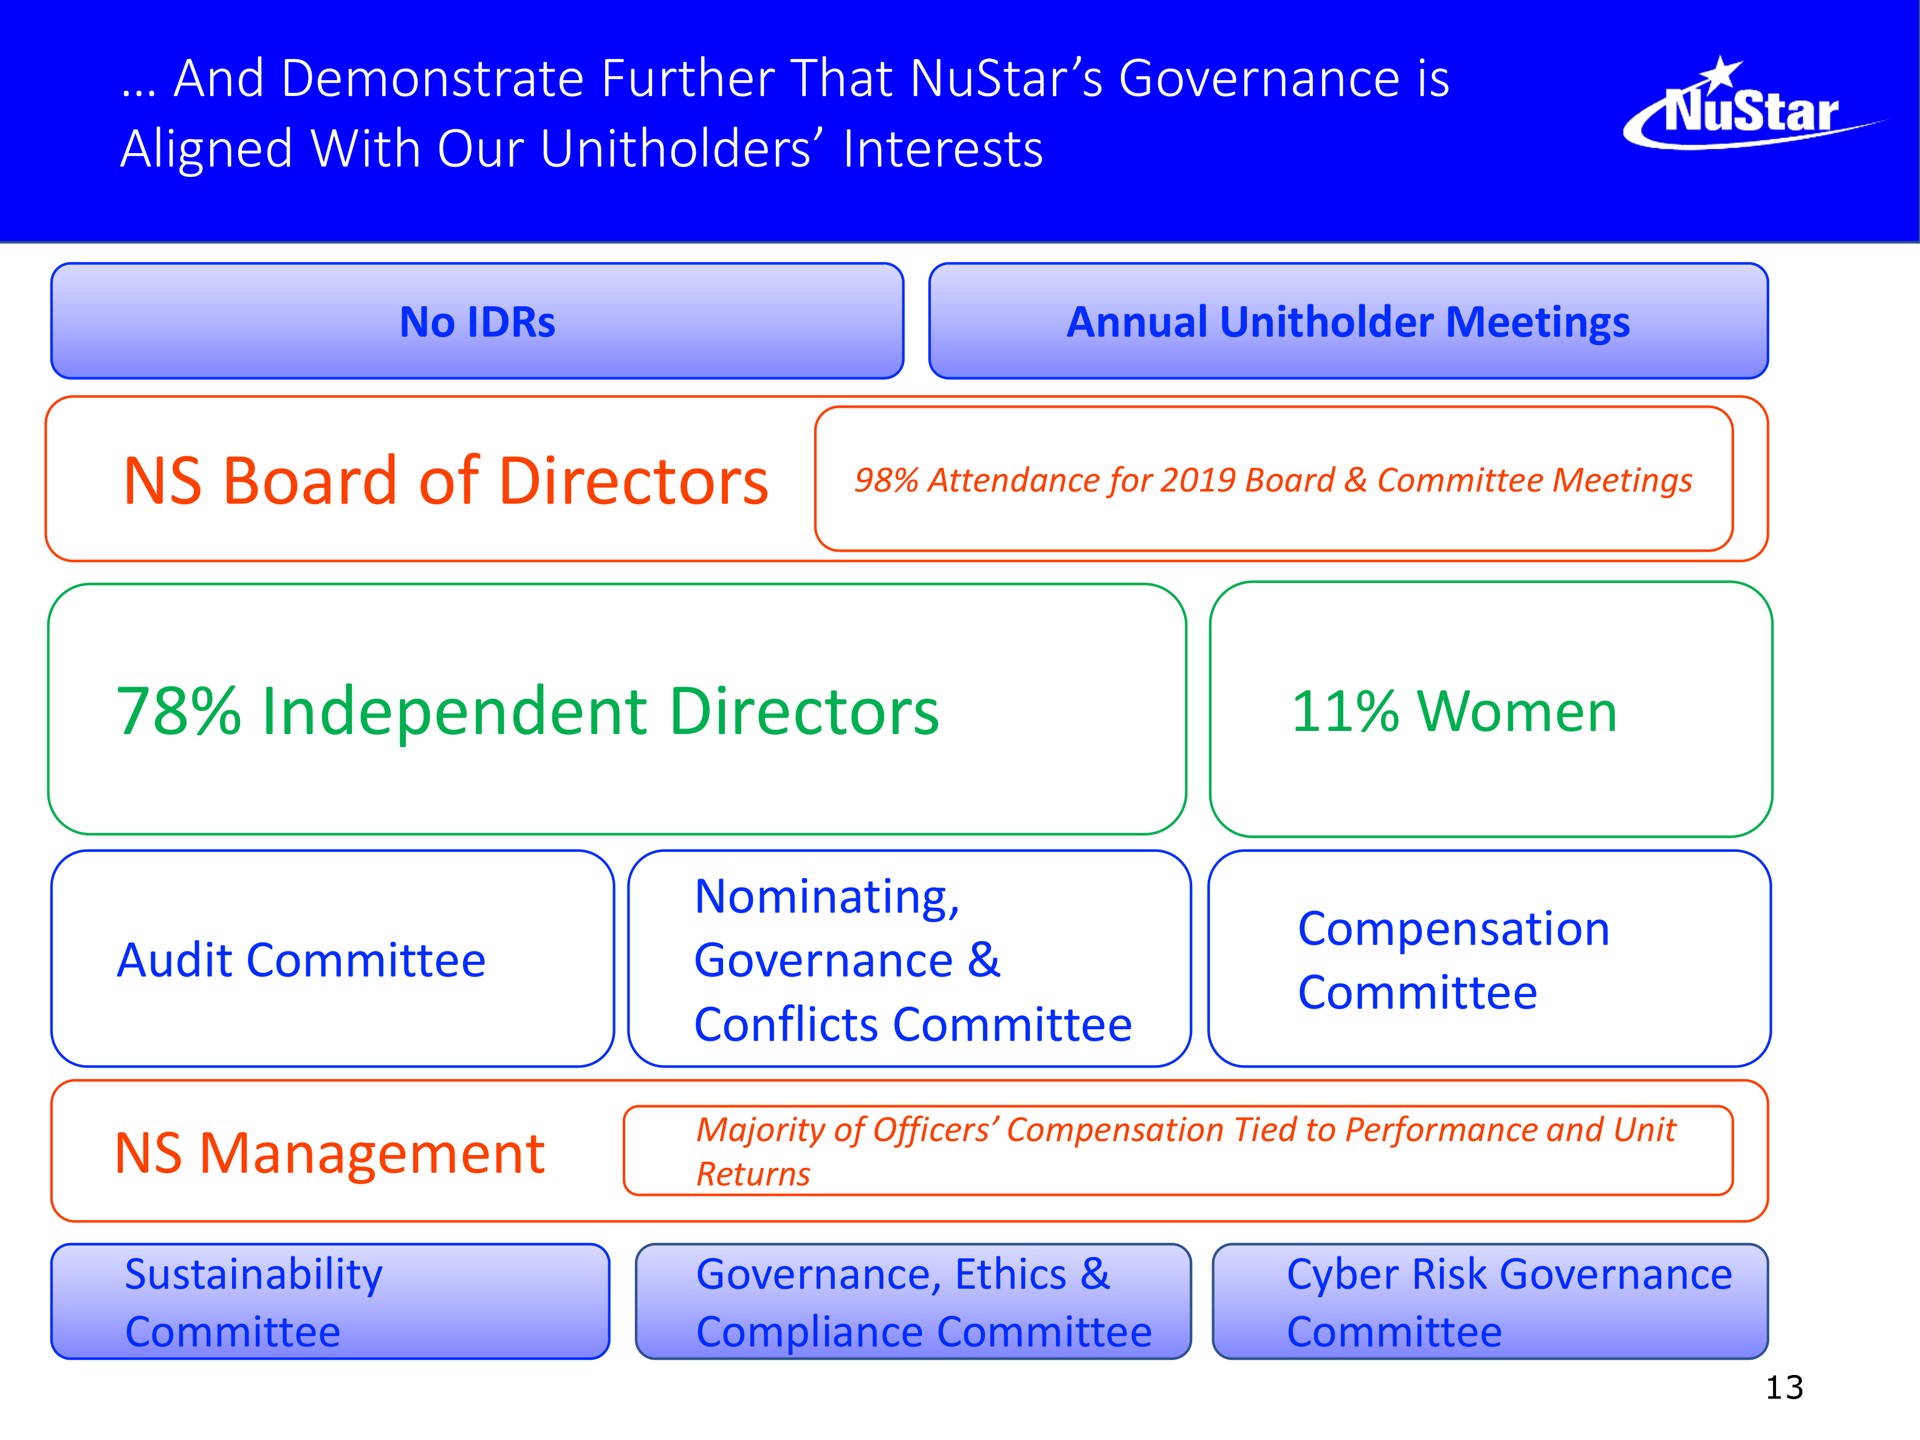 and demonstrate further that governance is aligned with our interests board of directors independent directors women audit committee nominating governance conflicts committee compensation committee management | NuStar Energy